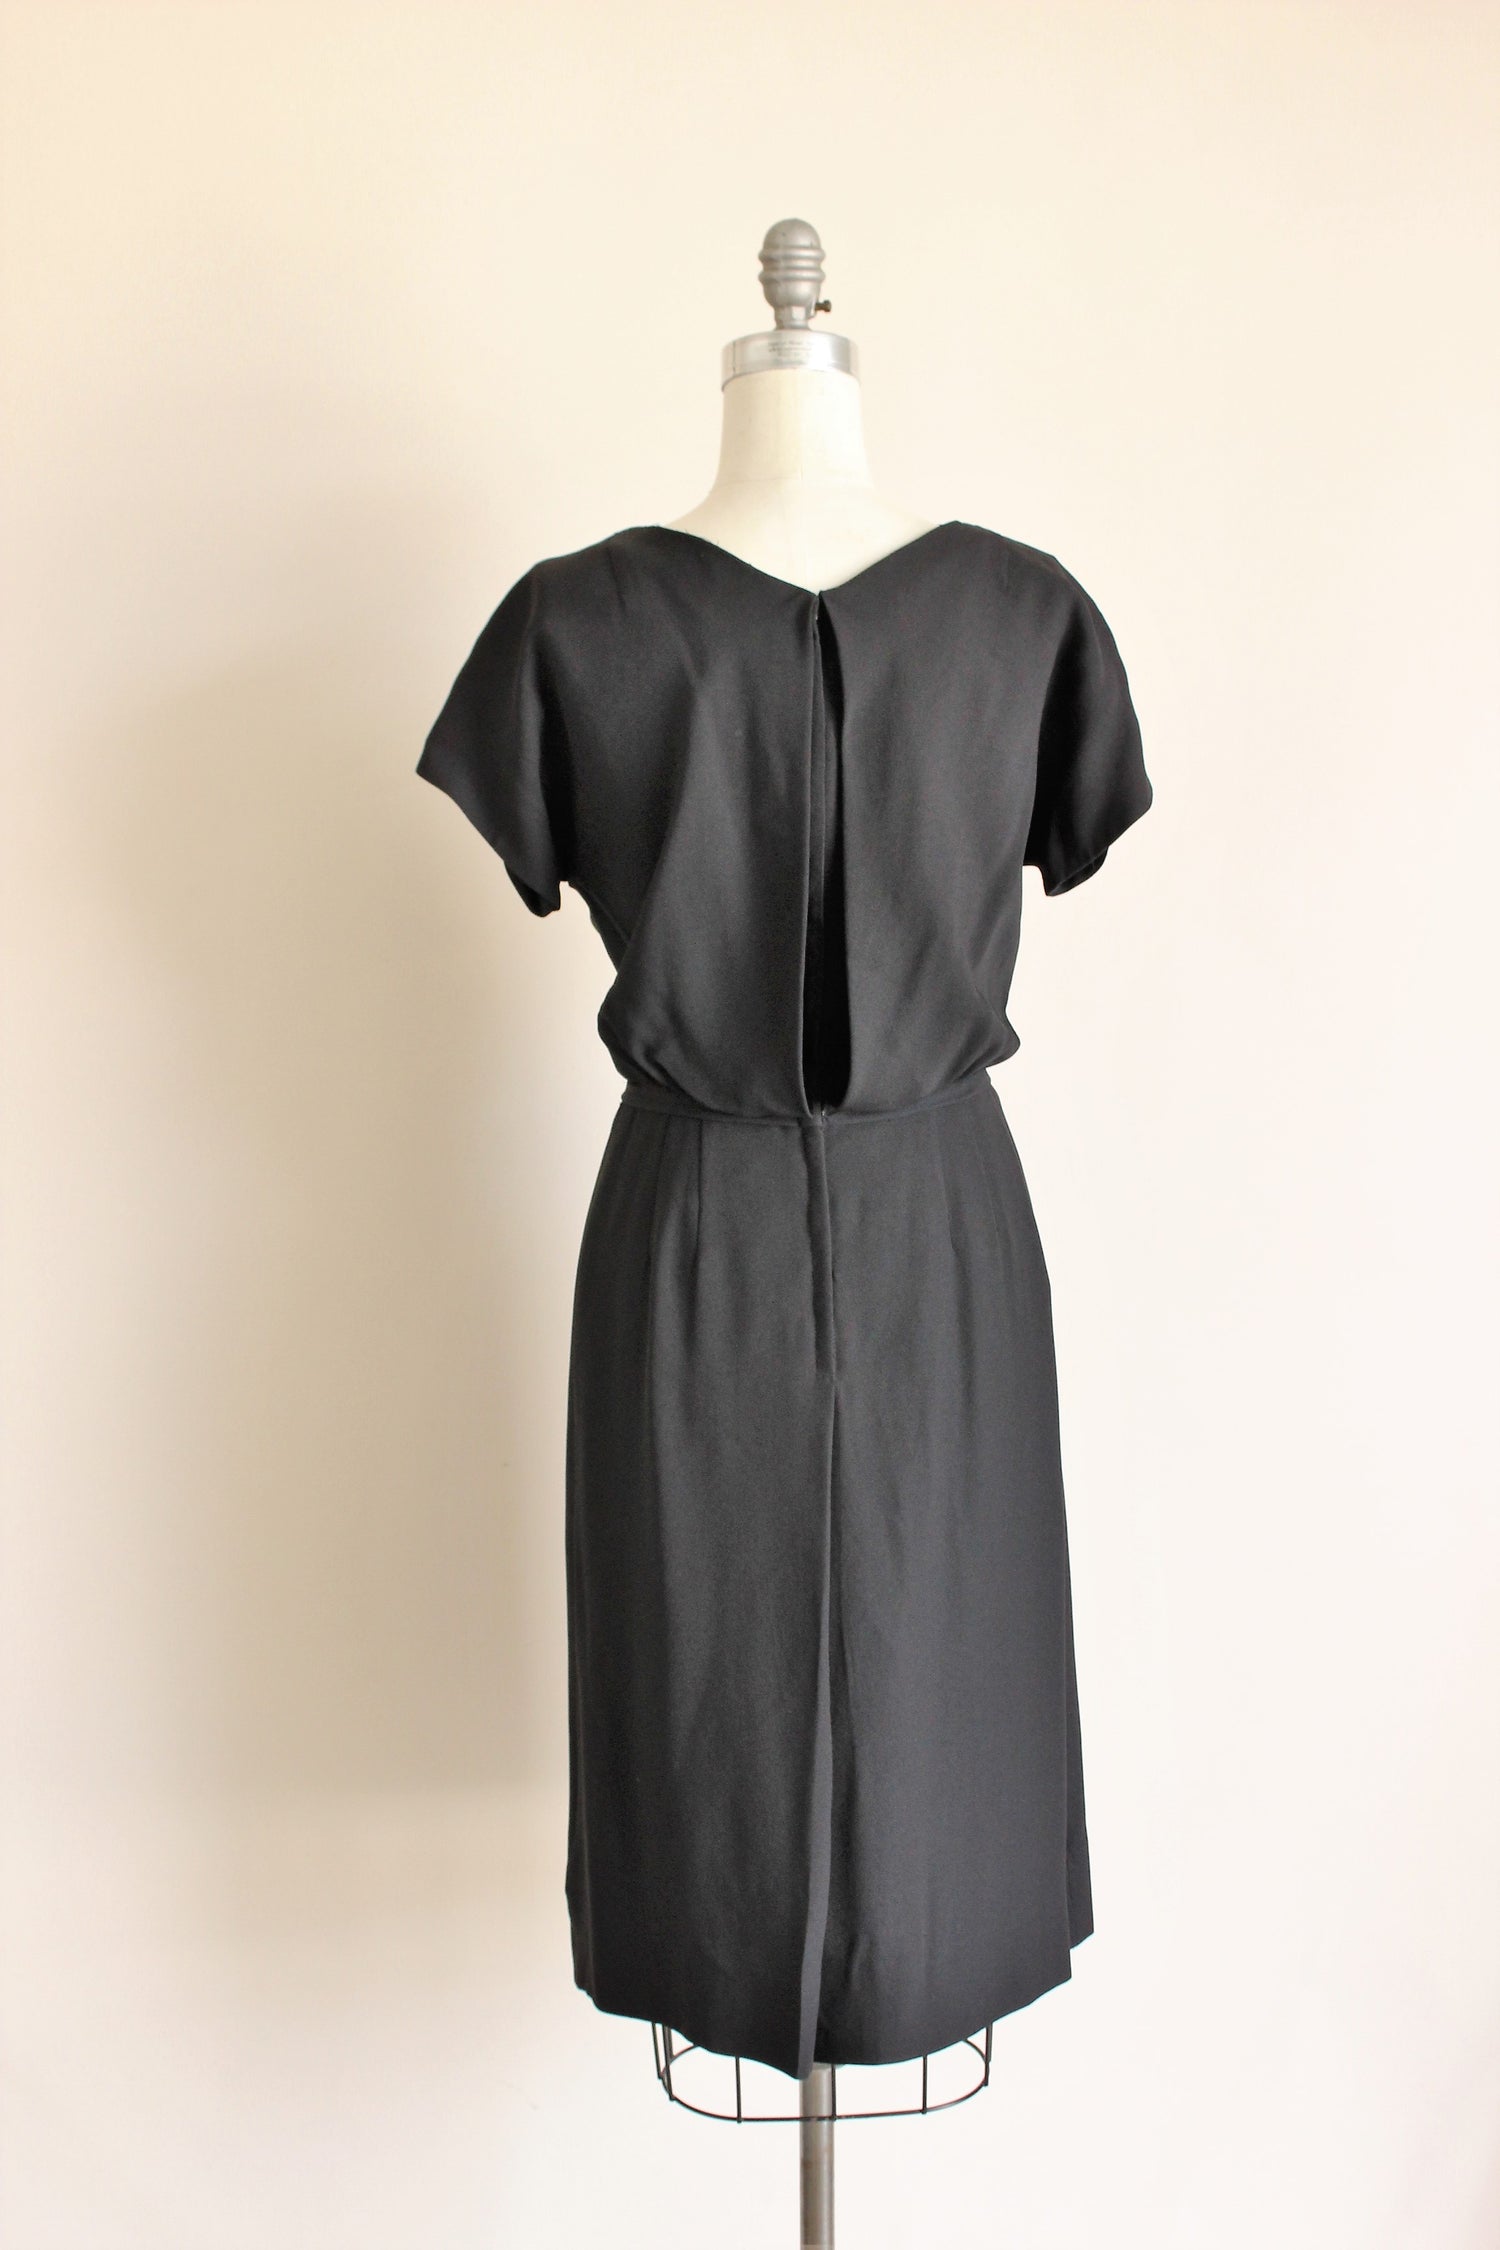 Vintage 1950s Leslie Fay Black Dress With Bows